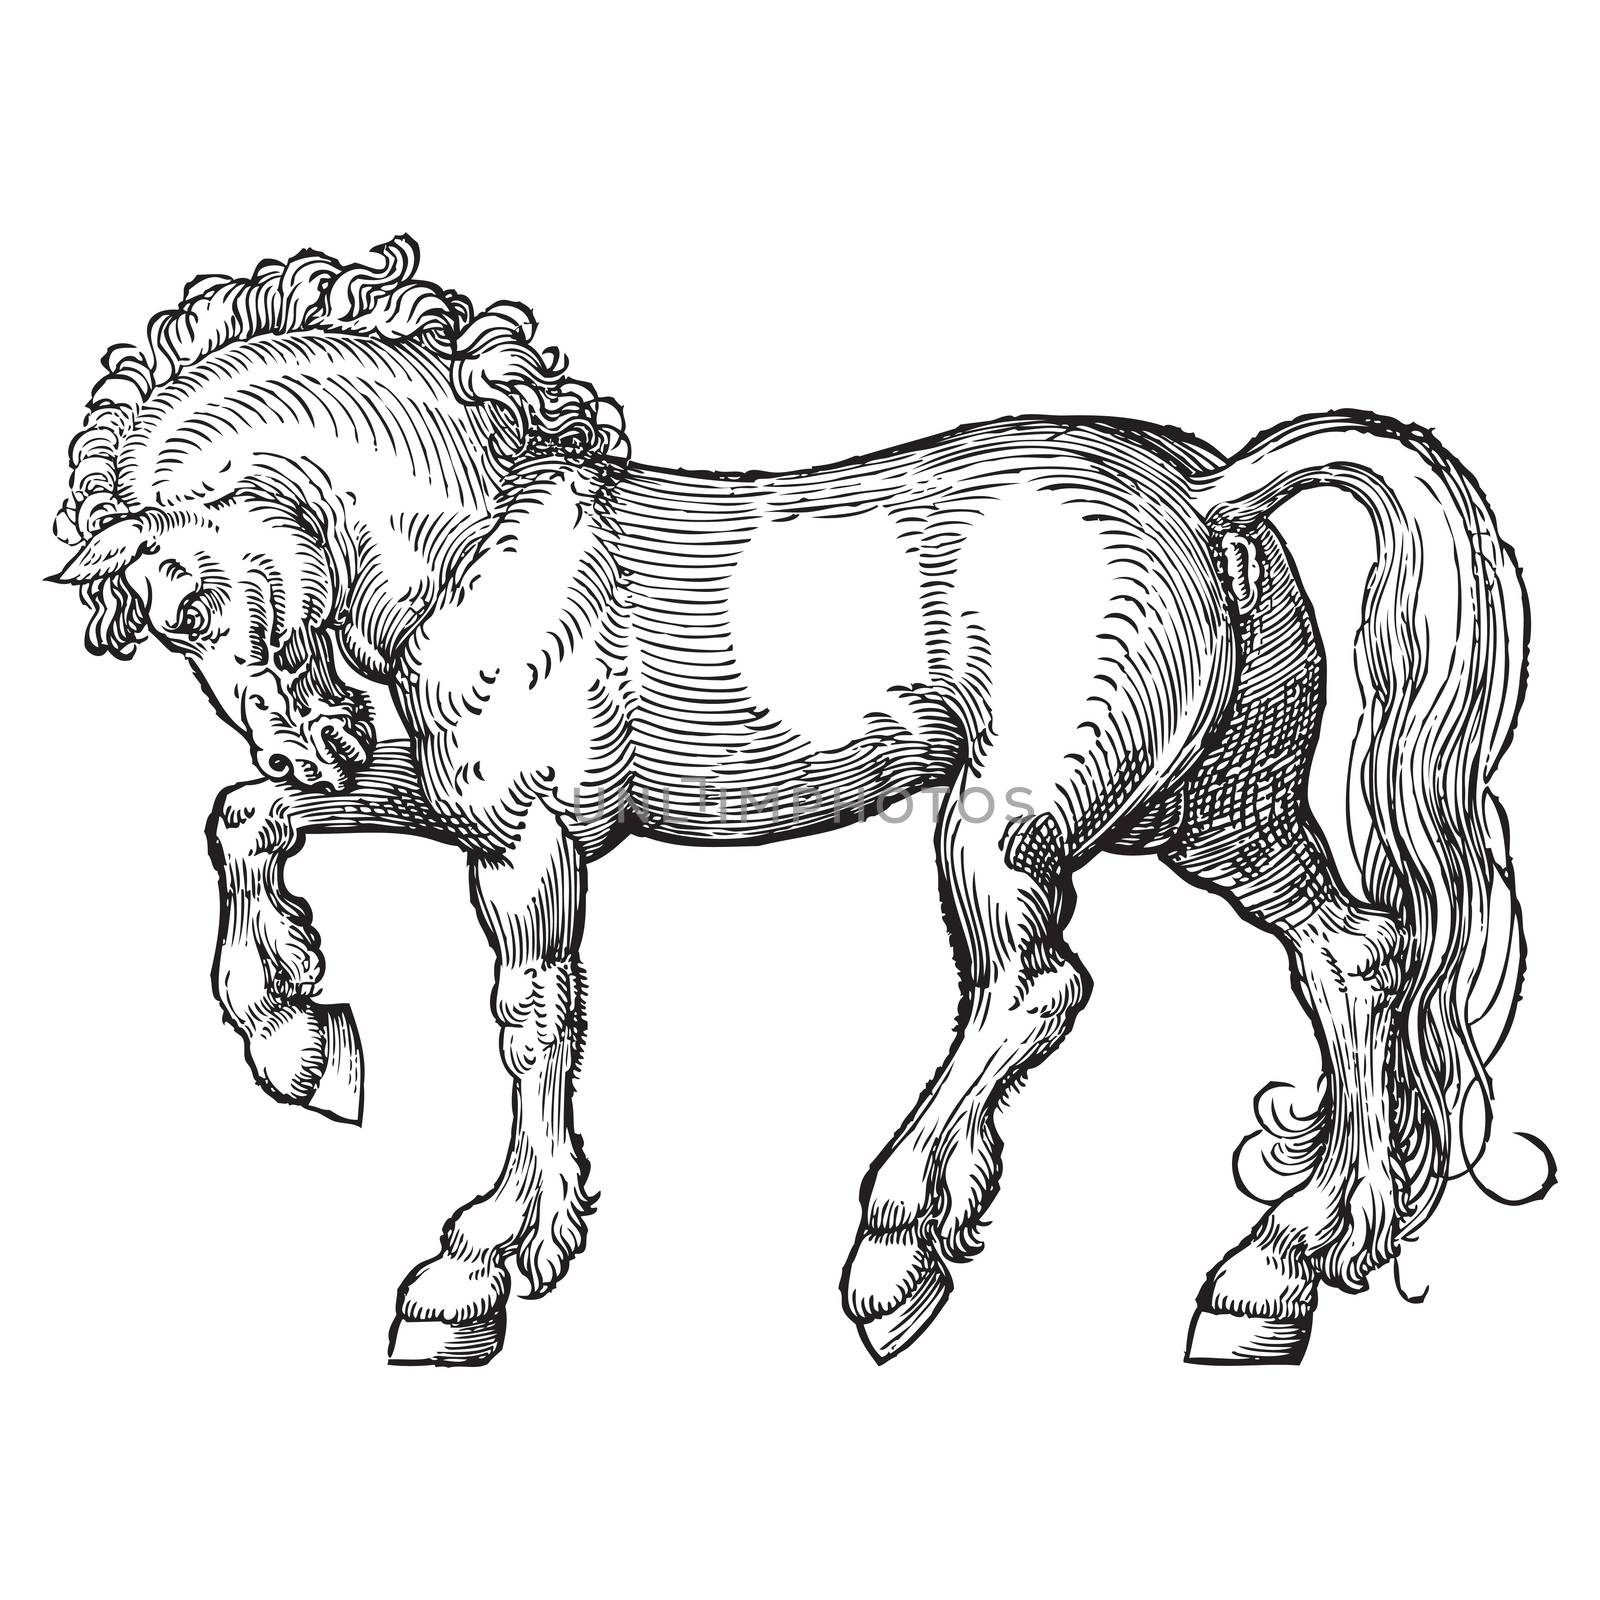 Ancient style engraving of a signle horse isolated on white